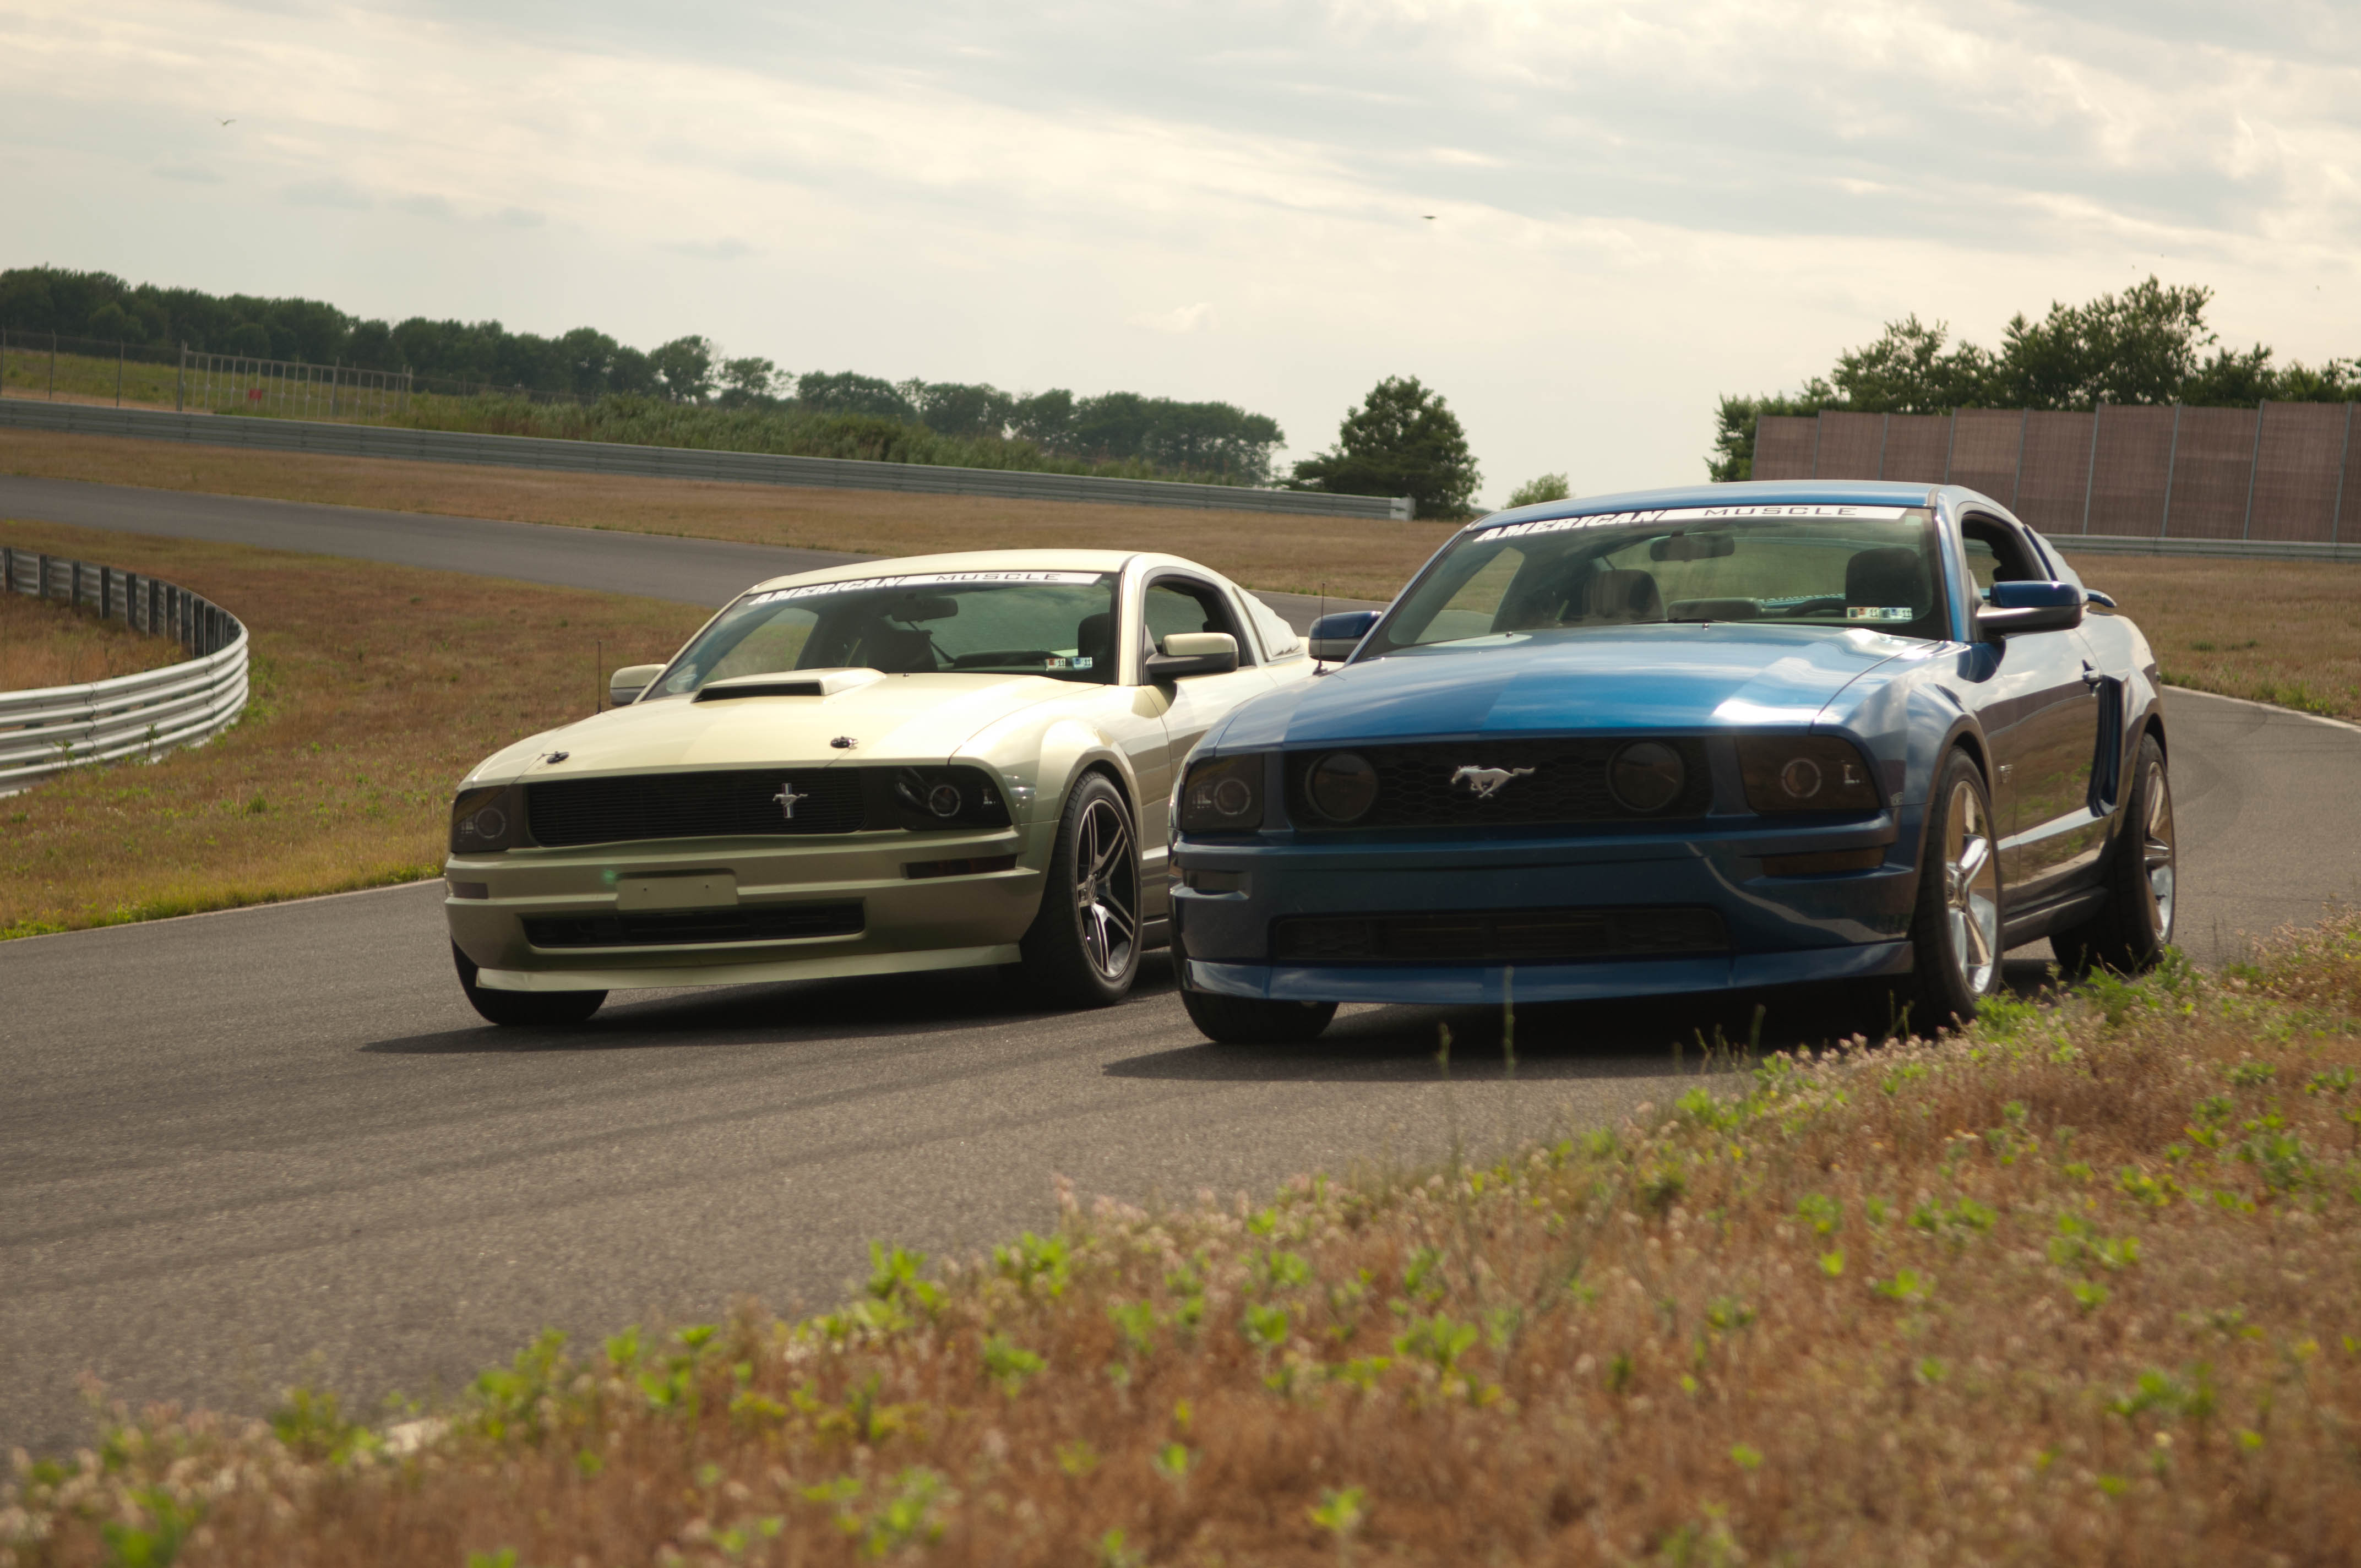 2005 and a 2009 Mustang at the Track